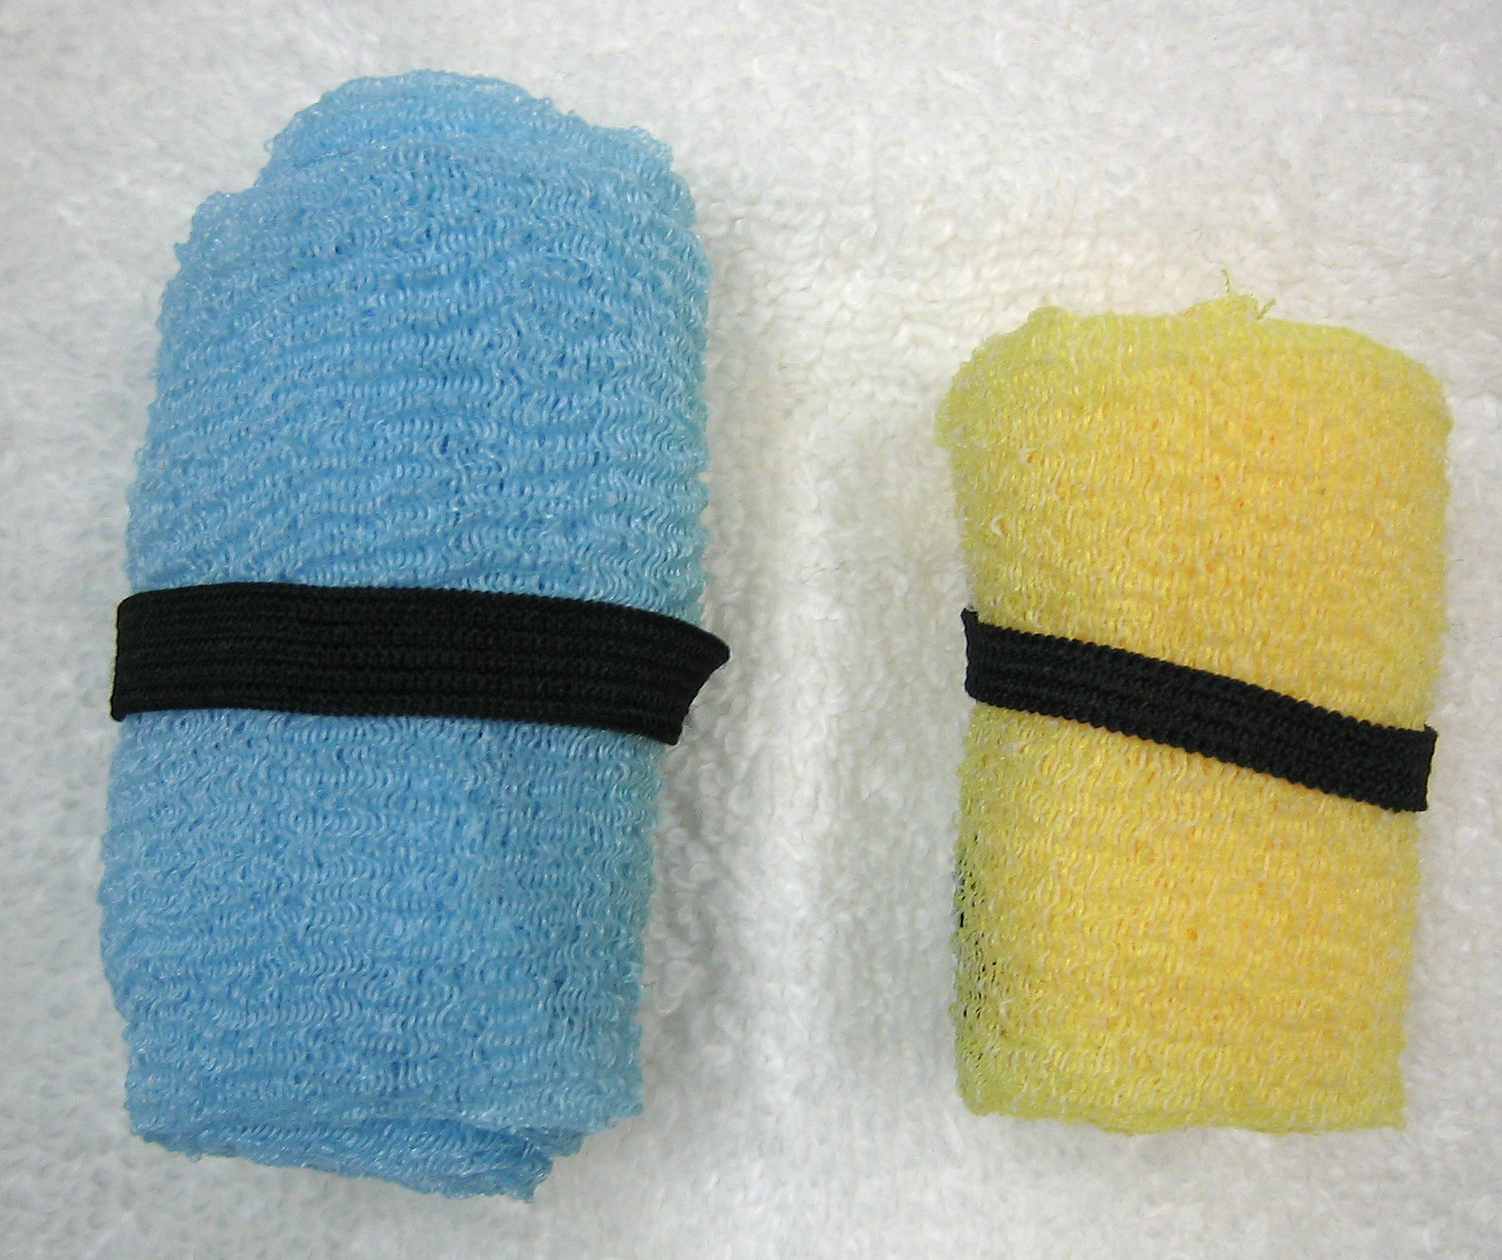 Towels rolled and secured with elastic loop